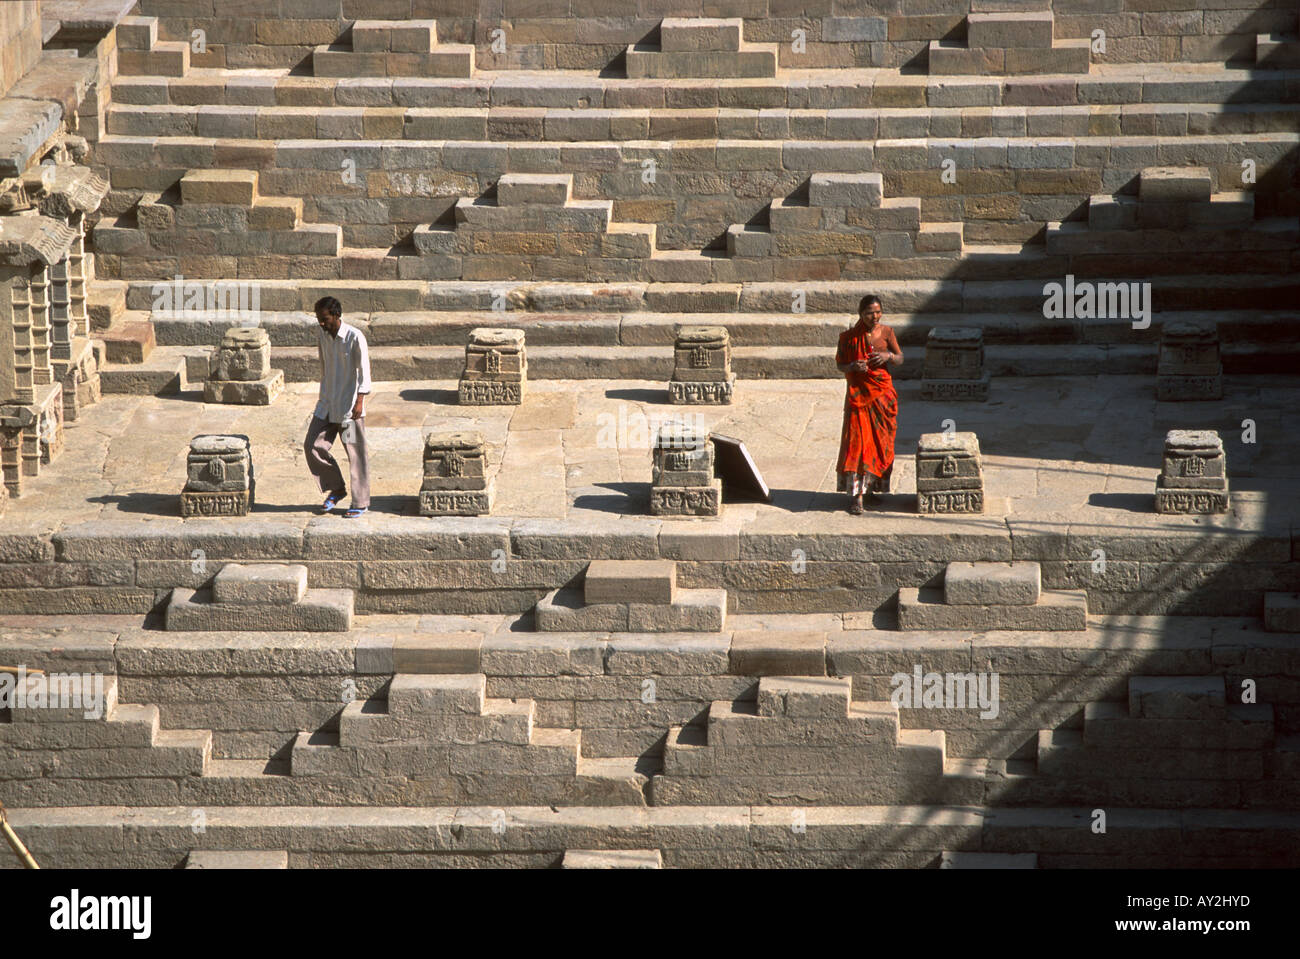 Woman in red on the steps of the Patan step well, called the Rani ki vav, Gujarat, India. Built about 1050 A.D. Stock Photo